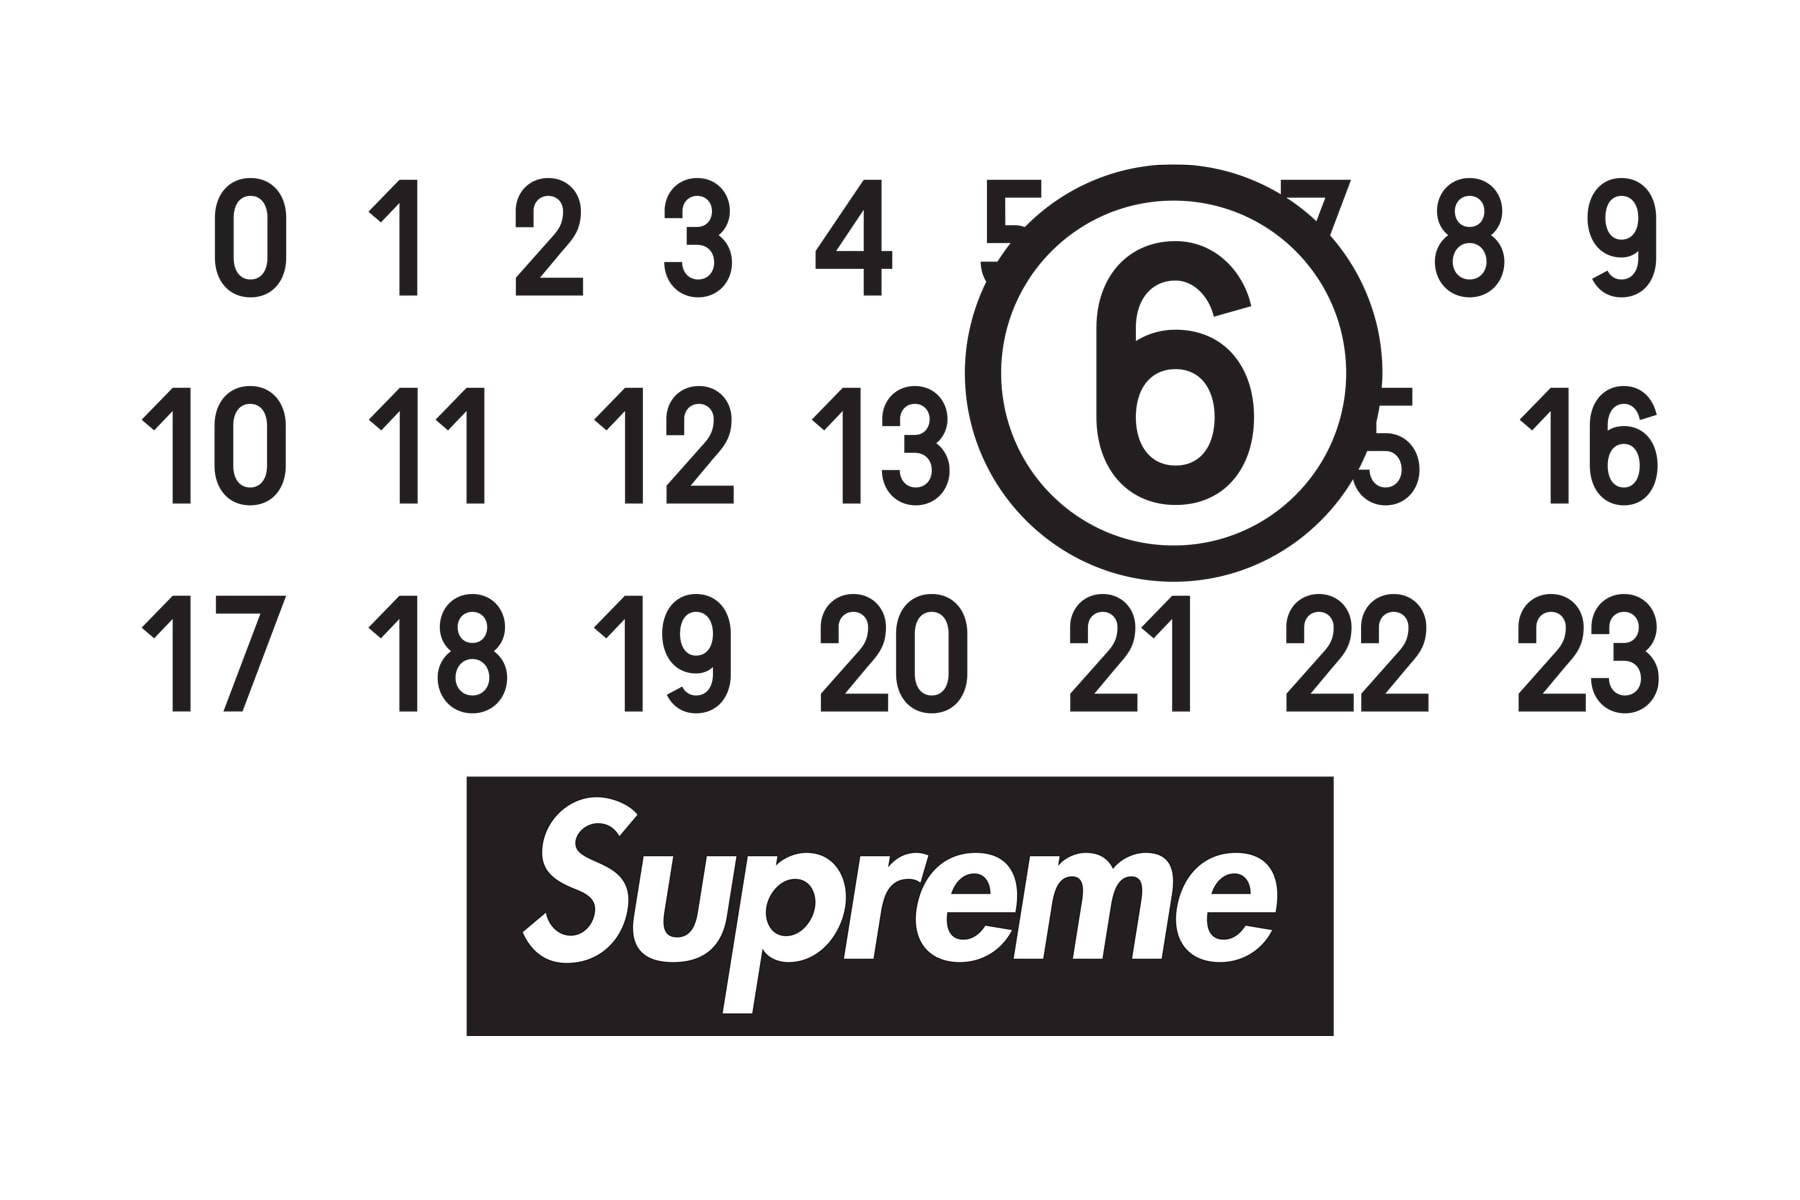 Is a Maison Margiela x Supreme Collaboration in the Works?